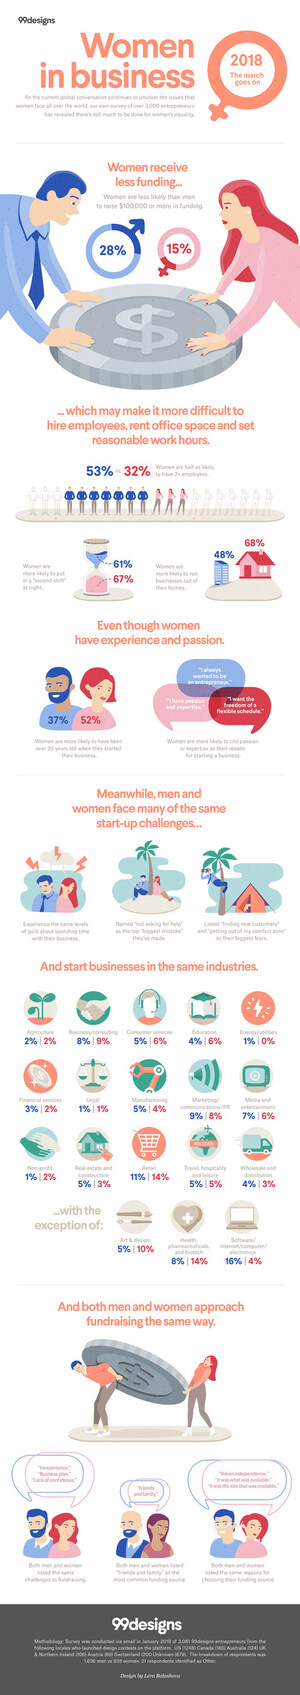 International Women's Day Survey Reveals Continuing Funding Gap and Gender Differences in Approach to Entrepreneurship - Along with Many Similarities